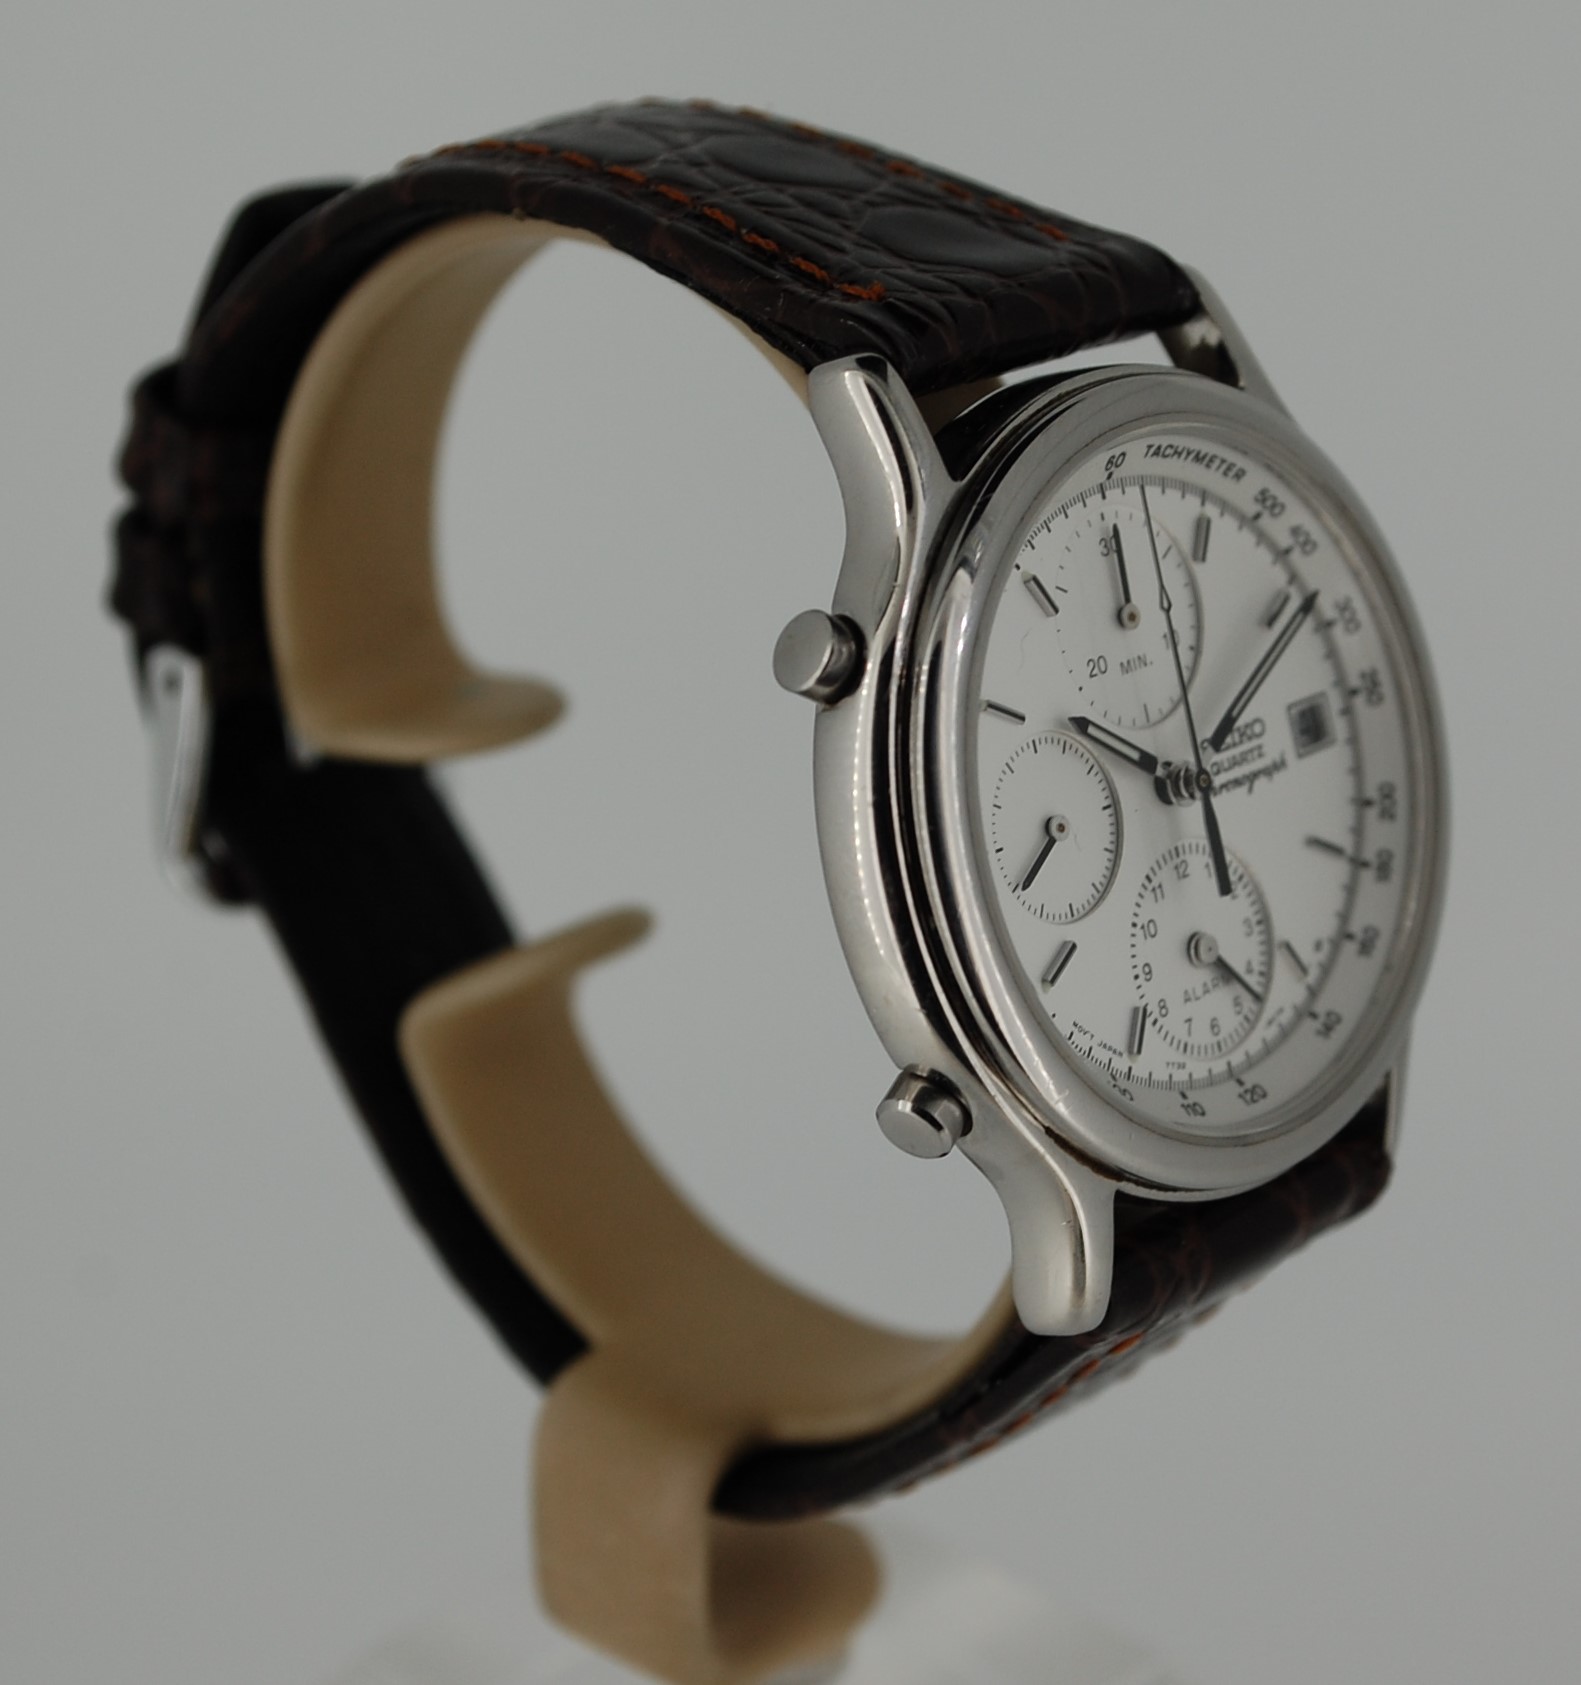 SOLD Seiko Chronograph 7T32-6A50 - Birth Year Watches